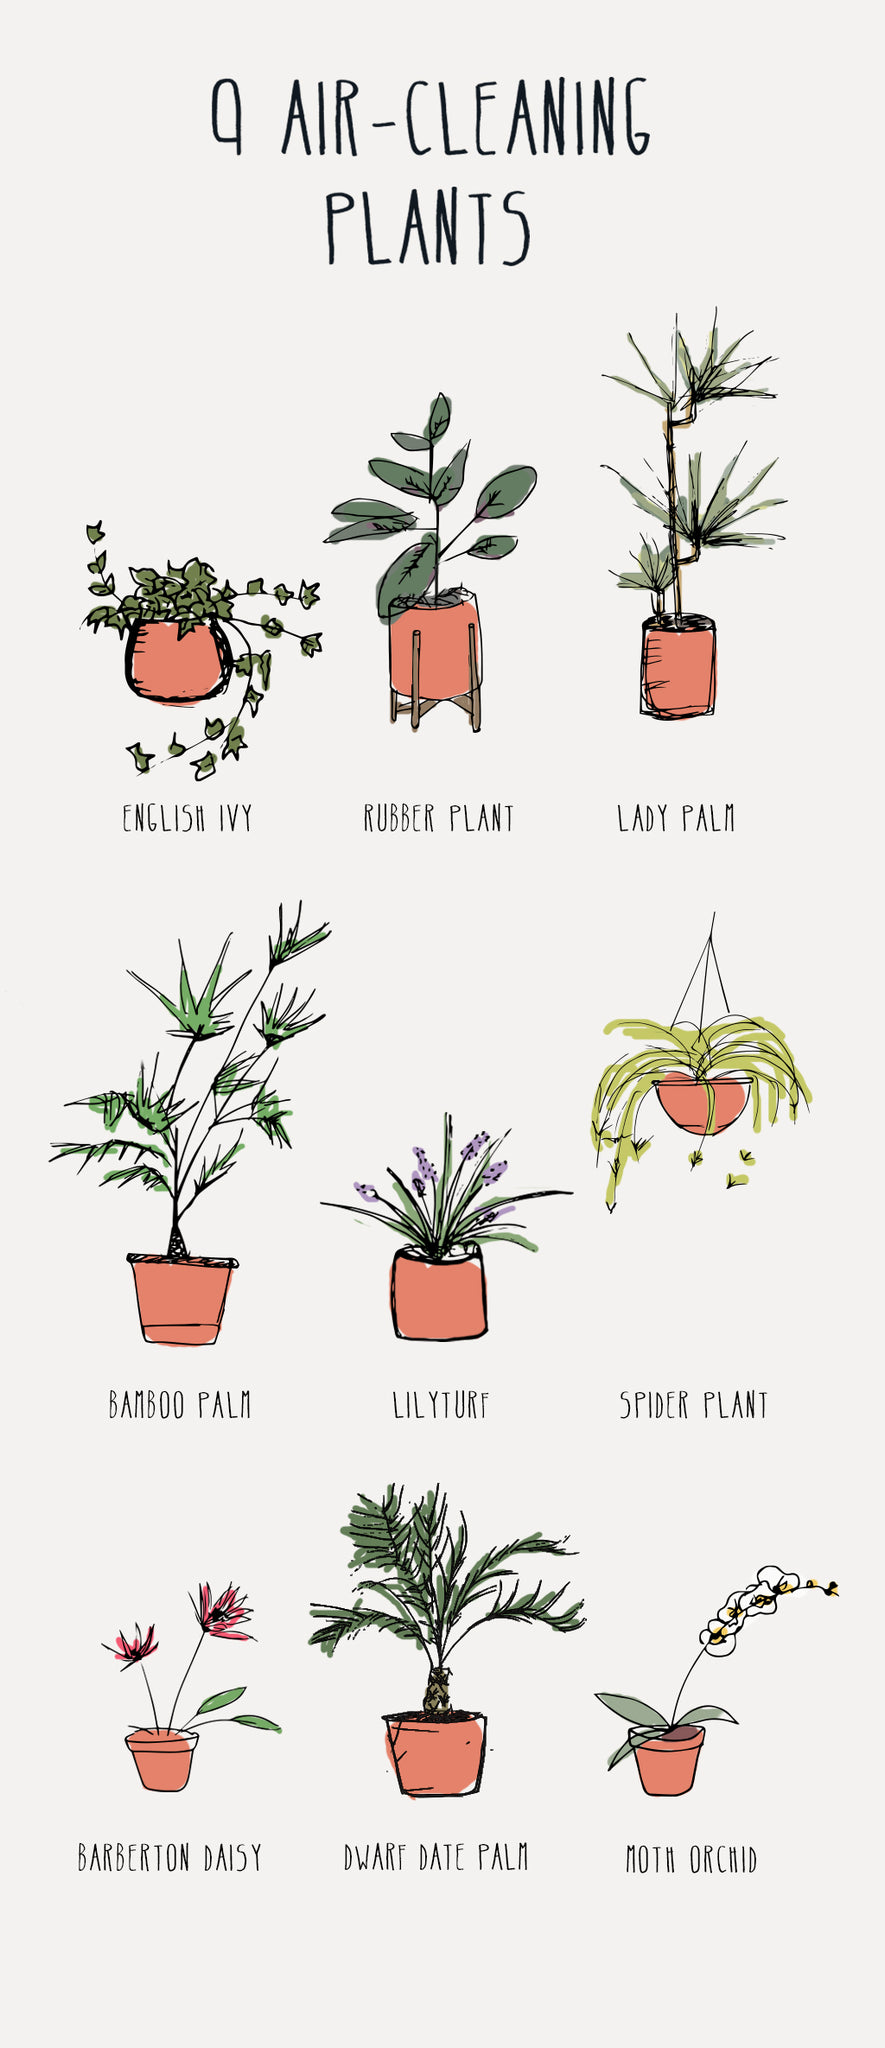 Best Air-Cleaning Plants